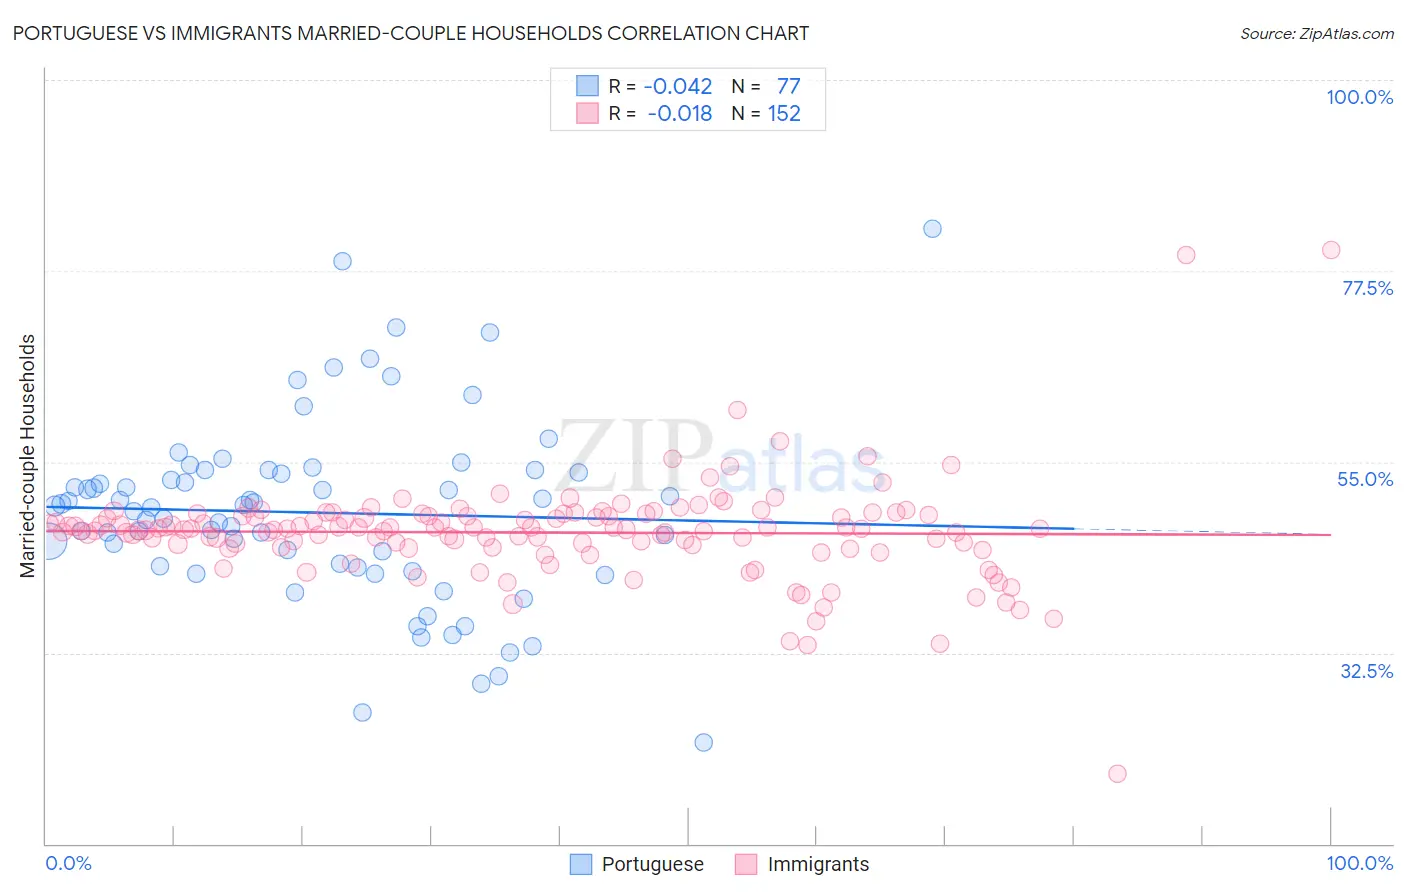 Portuguese vs Immigrants Married-couple Households